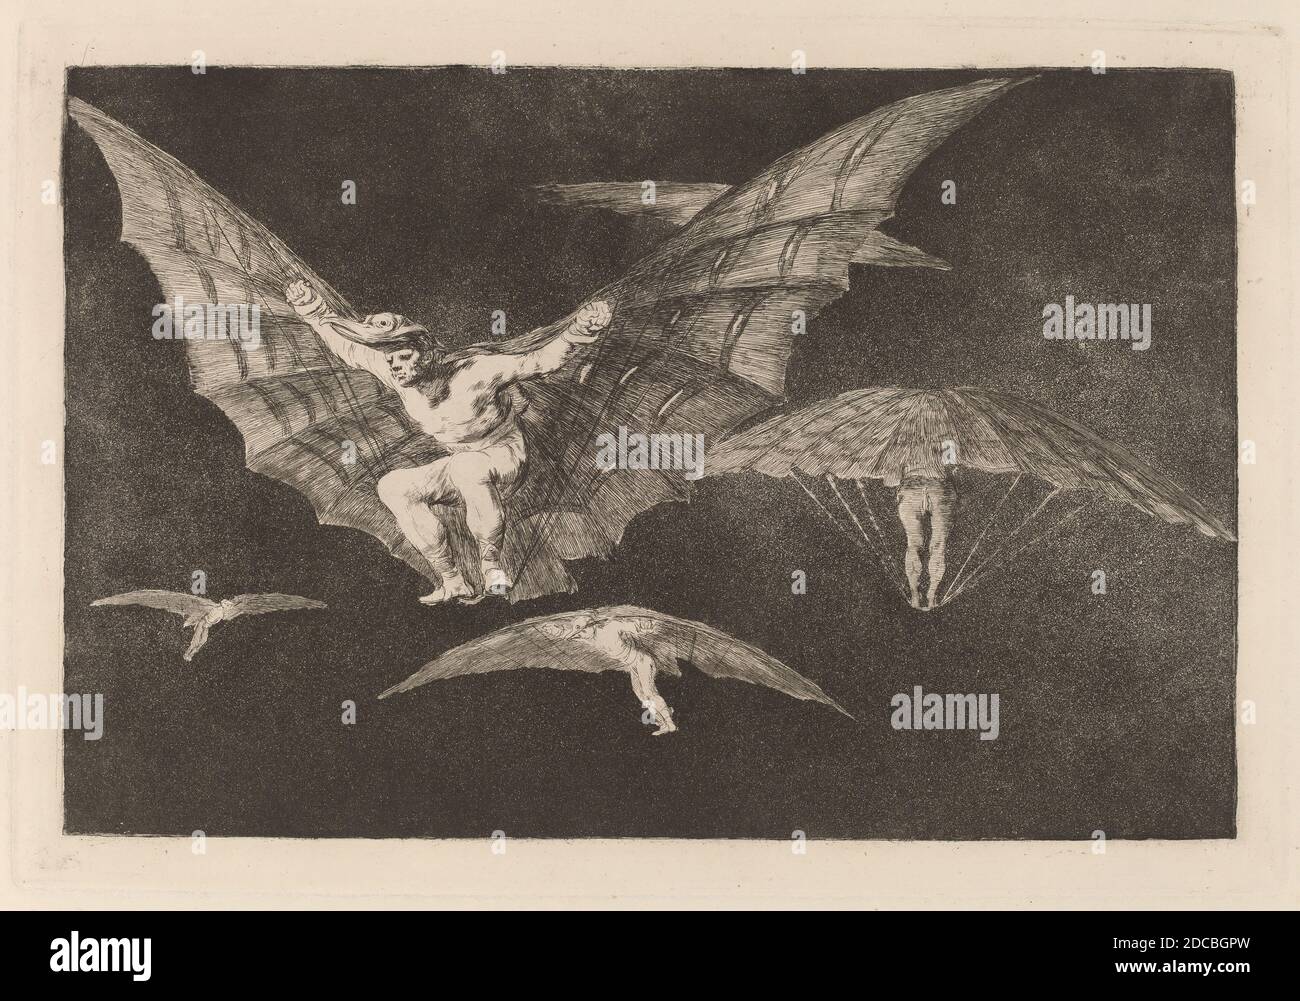 Francisco de Goya, (artist), Spanish, 1746 - 1828, Modo de volar (A Way of Flying), Proverbios: pl.13, (series), in or after 1816, etching, aquatint and (drypoint Stock Photo